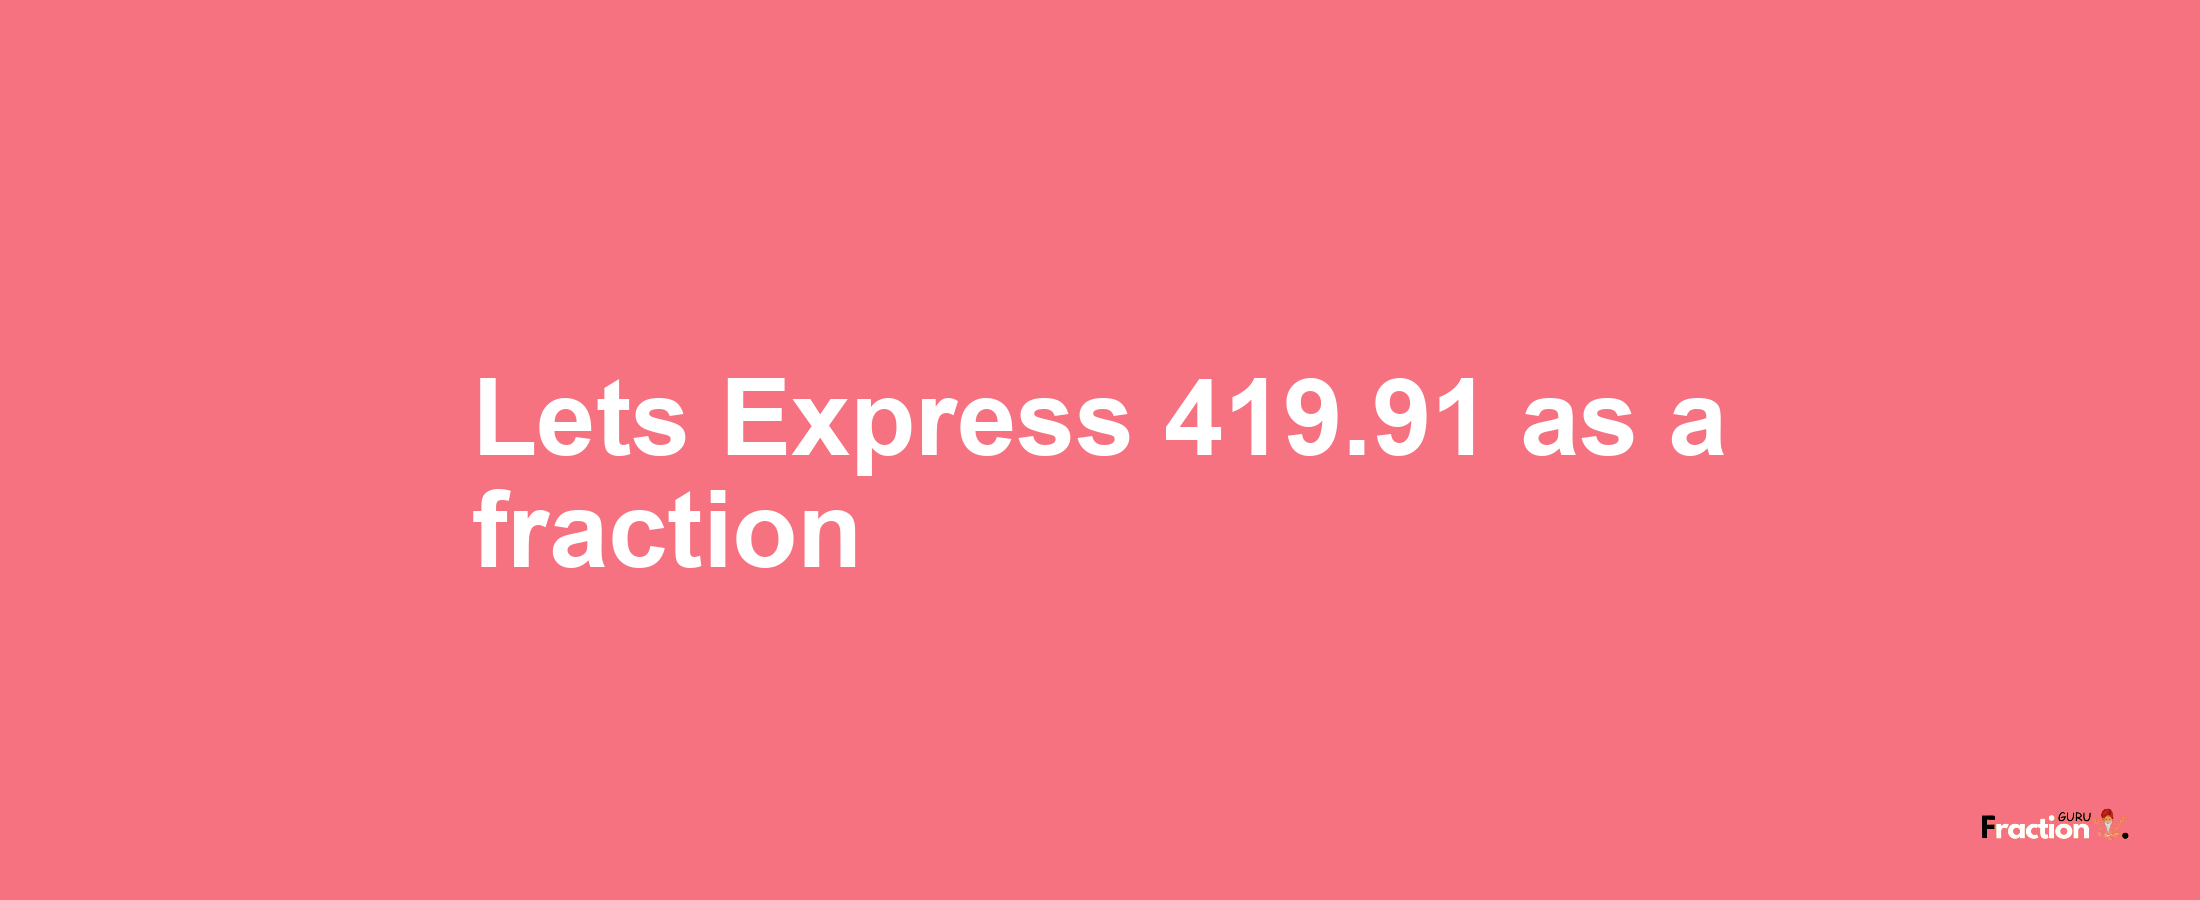 Lets Express 419.91 as afraction